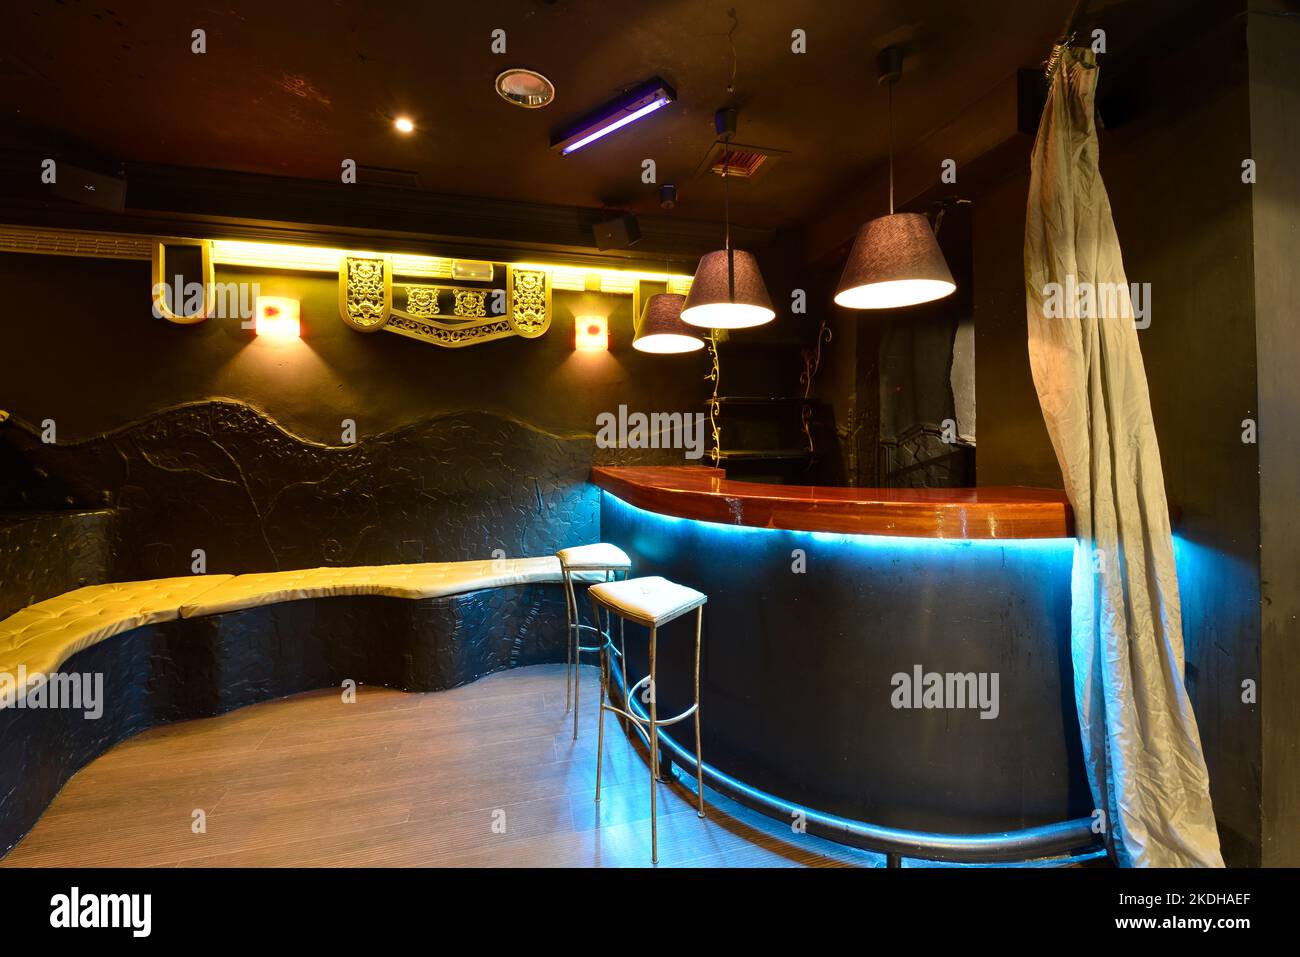 Disco room with illuminated staircase, tiers with gold cushions and black walls and ceilings and bar with blue led lights and mahogany wood countertop Stock Photo